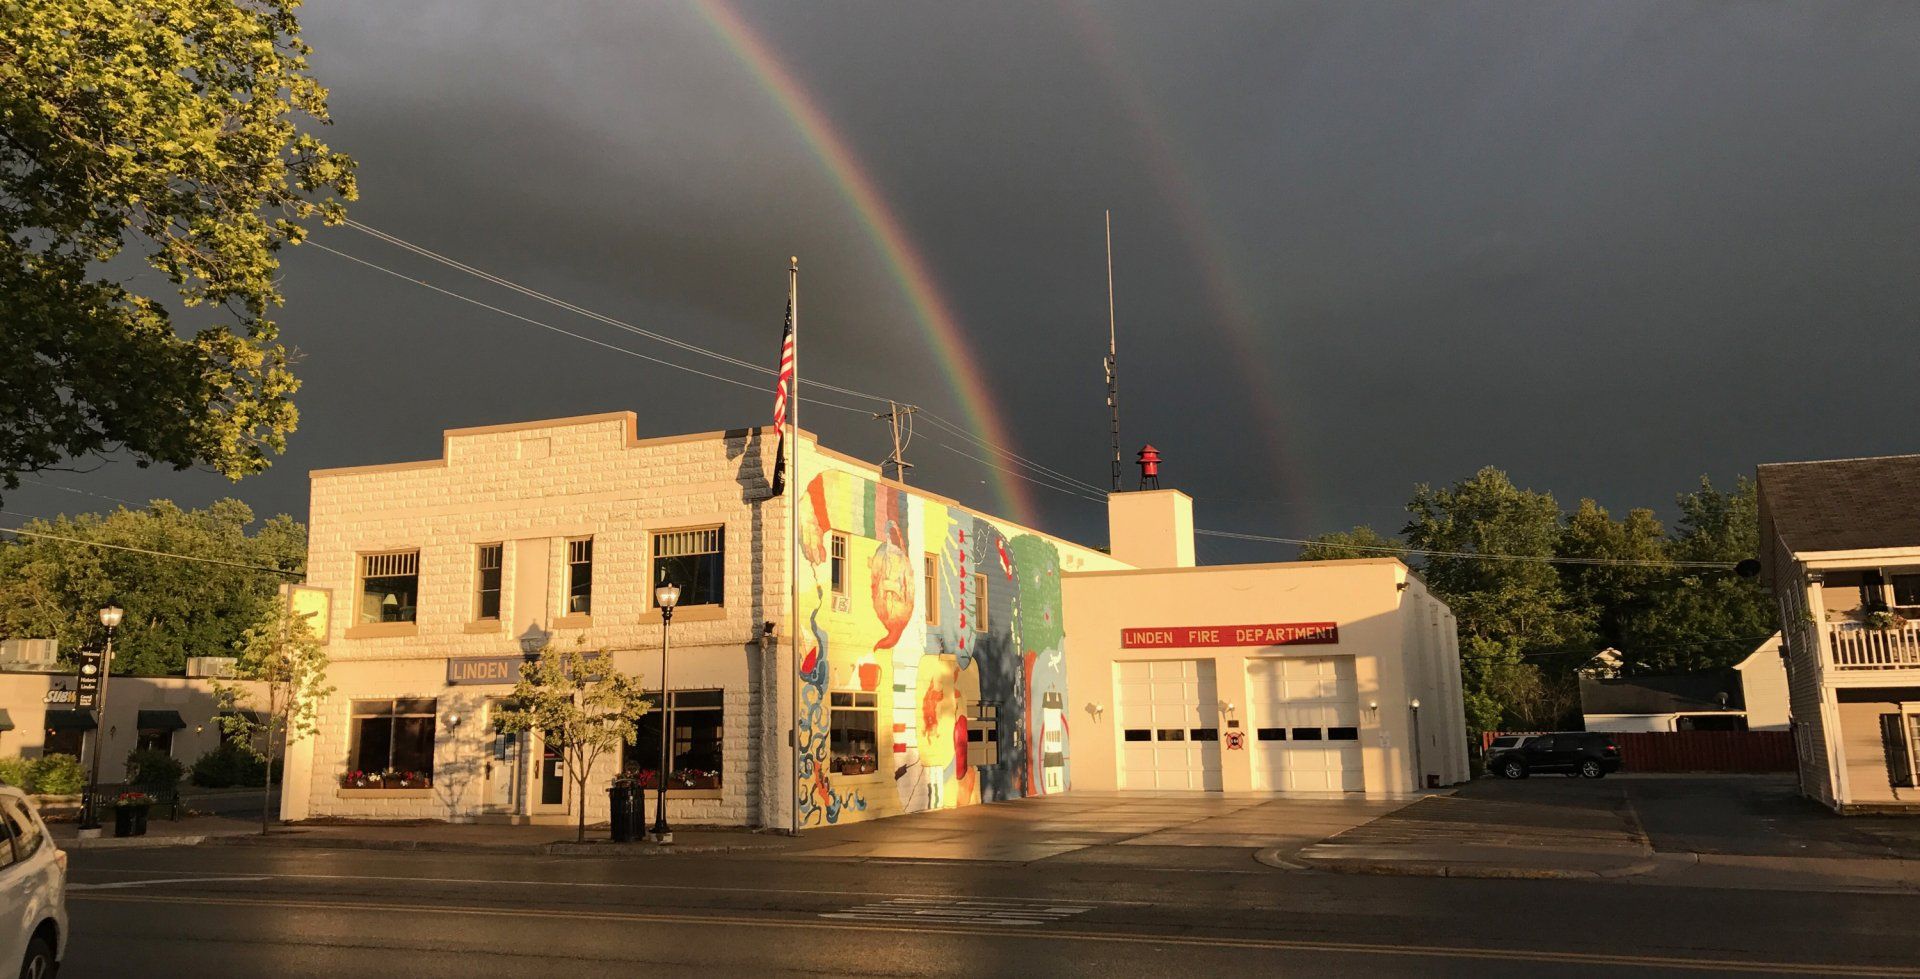 photo of the City of Linden Hall under a rainbow